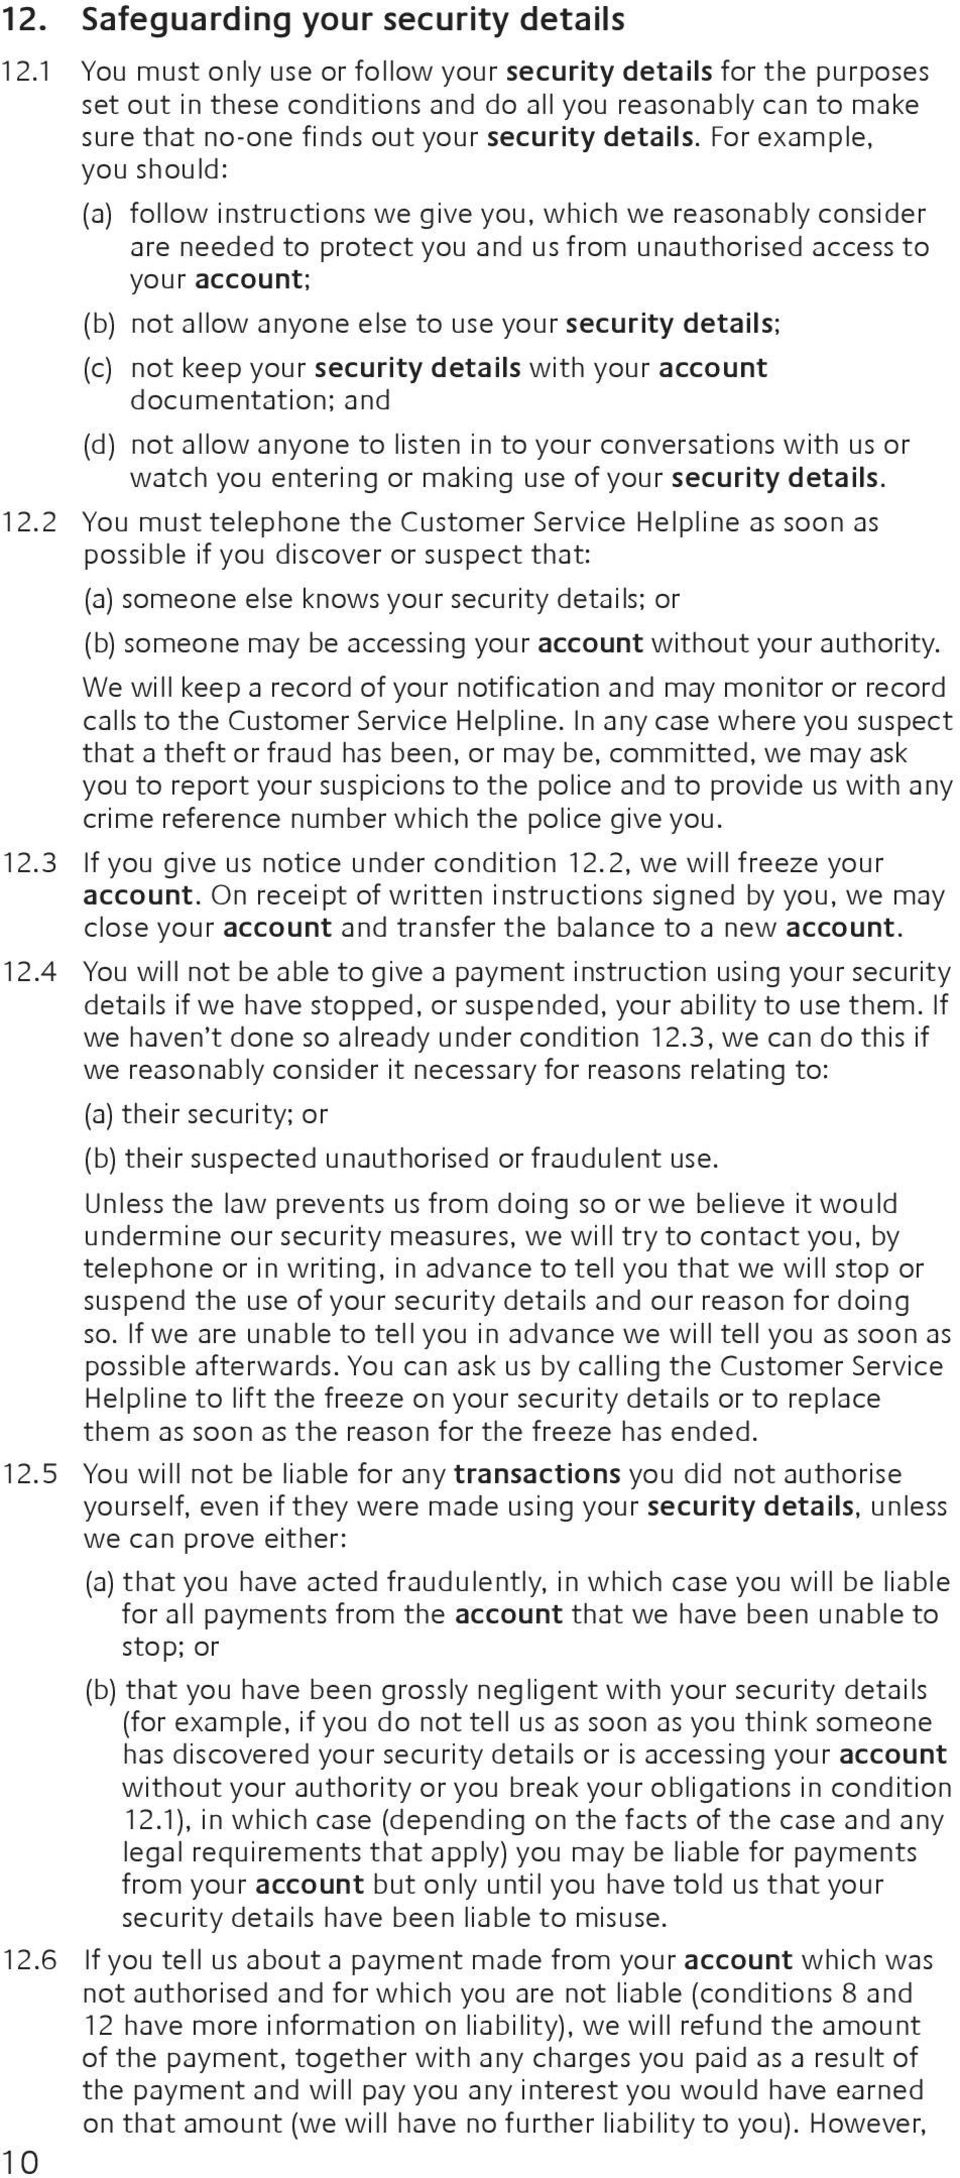 For example, you should: (a) follow instructions we give you, which we reasonably consider are needed to protect you and us from unauthorised access to your account; (b) not allow anyone else to use